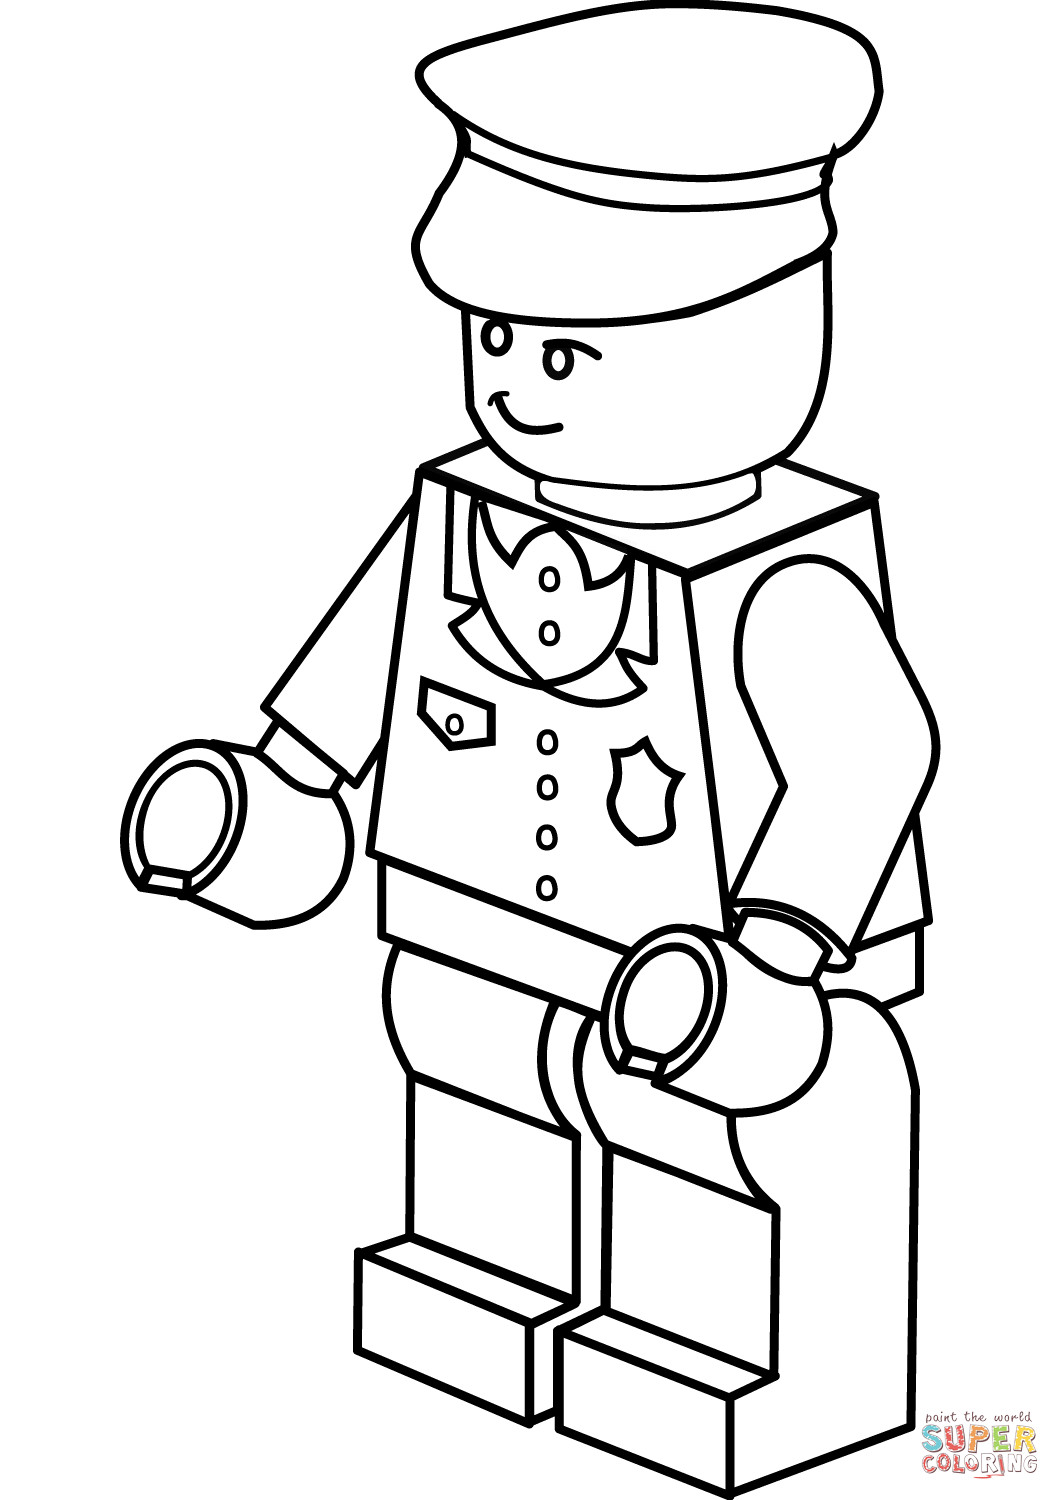 Police Officer Coloring Pages
 Lego Policeman coloring page